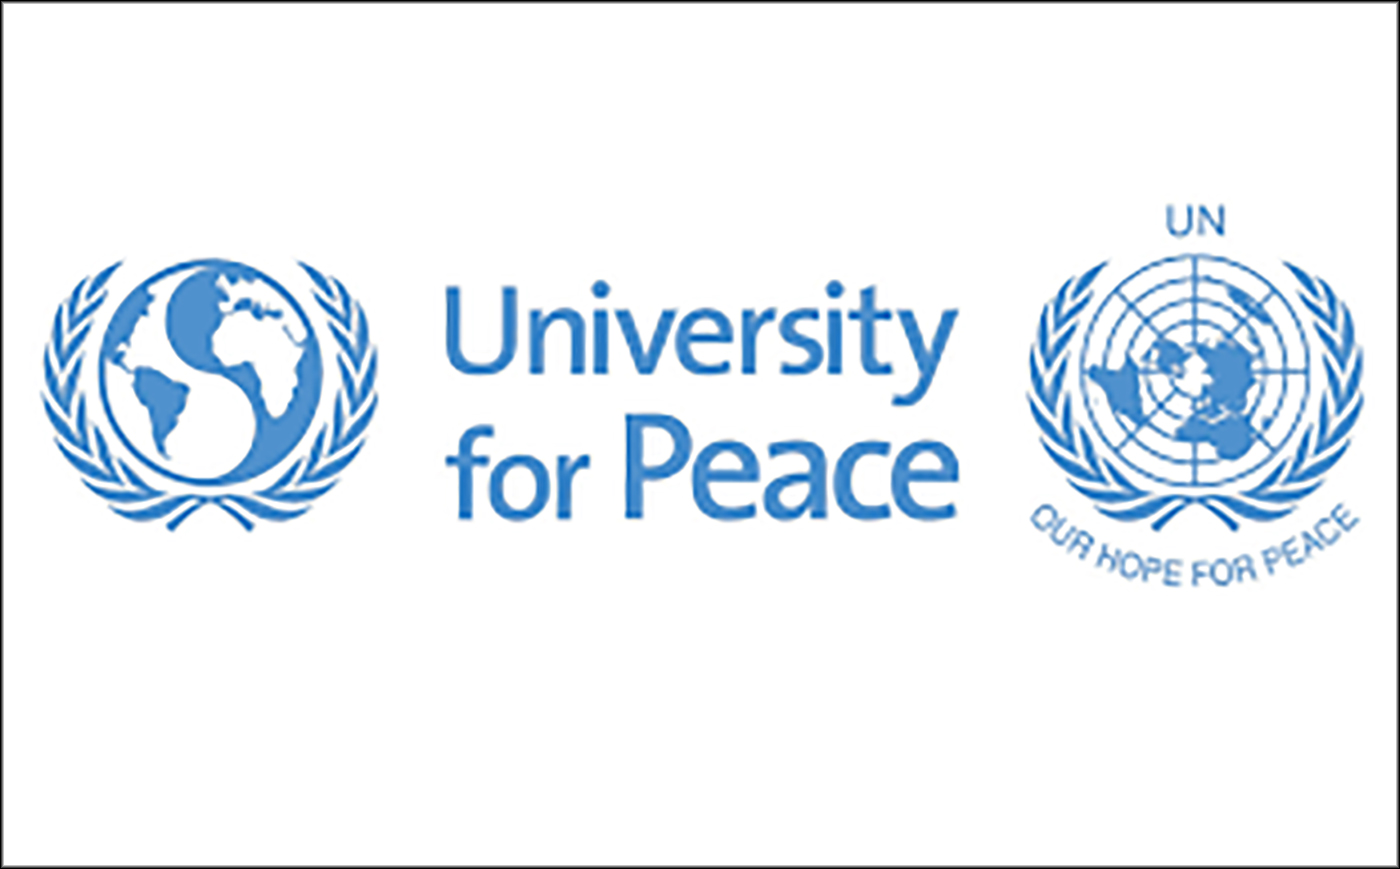 The University for Peace condemns the war in Ukraine and calls for dialogue